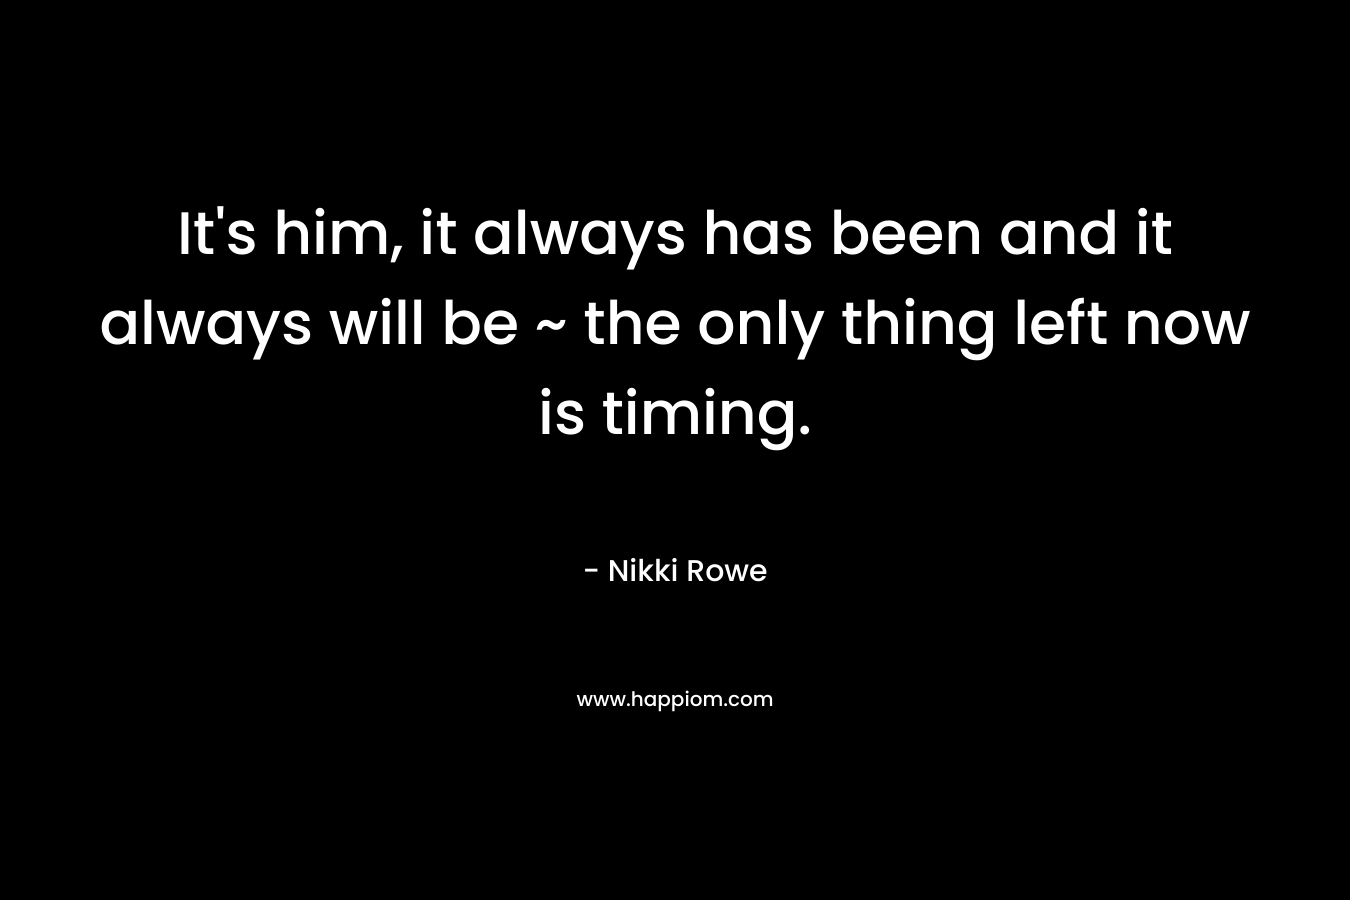 It's him, it always has been and it always will be ~ the only thing left now is timing.